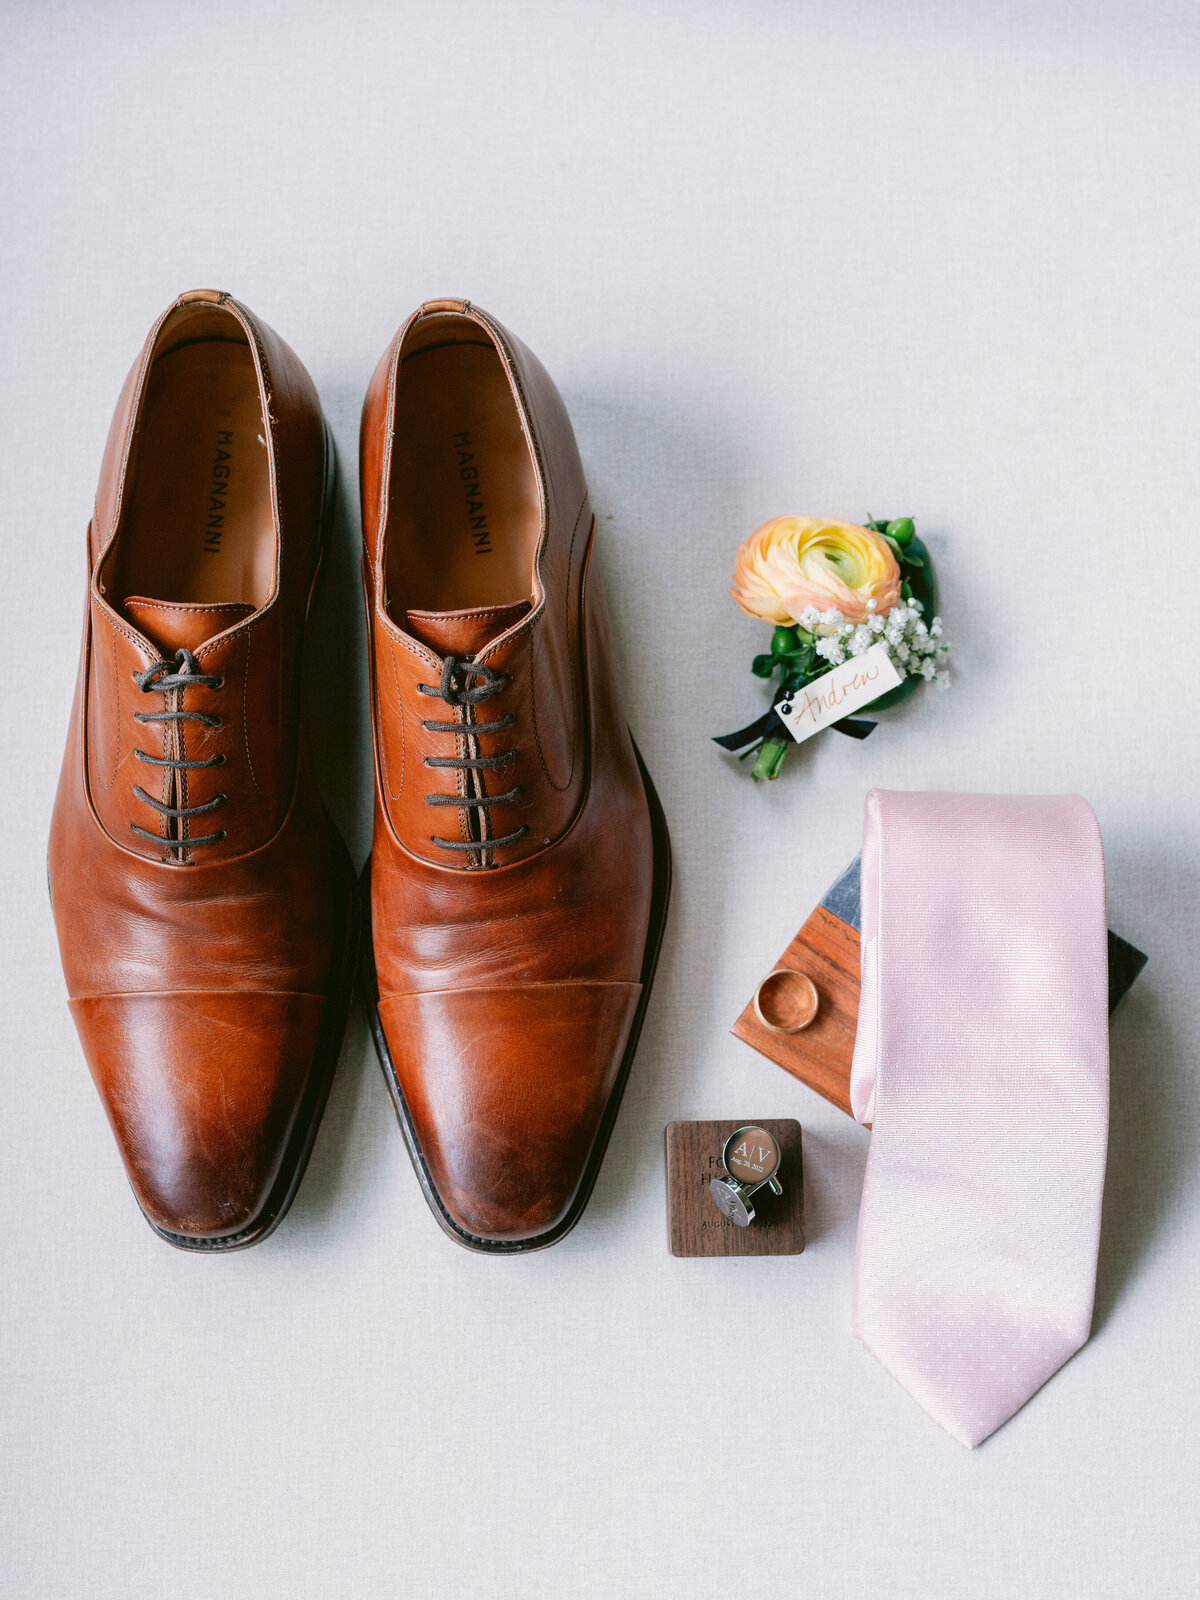 Grooms shoes, tie, rings and florals for wedding at The Grand Lady Austin